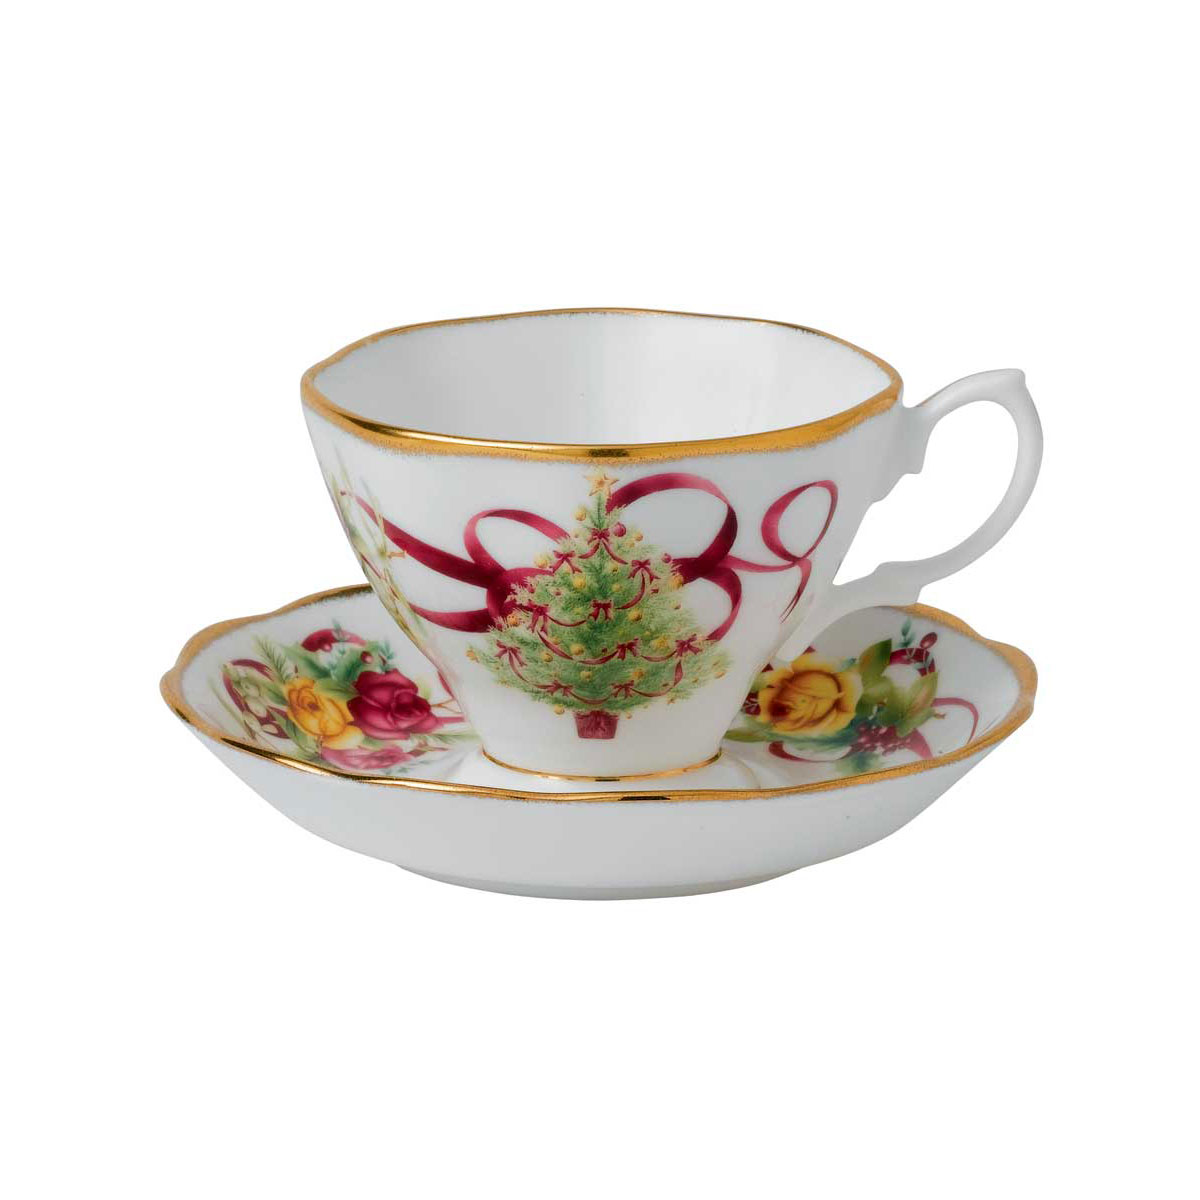 Royal Albert Old Country Roses Christmas Tree Teacup and Saucer Set